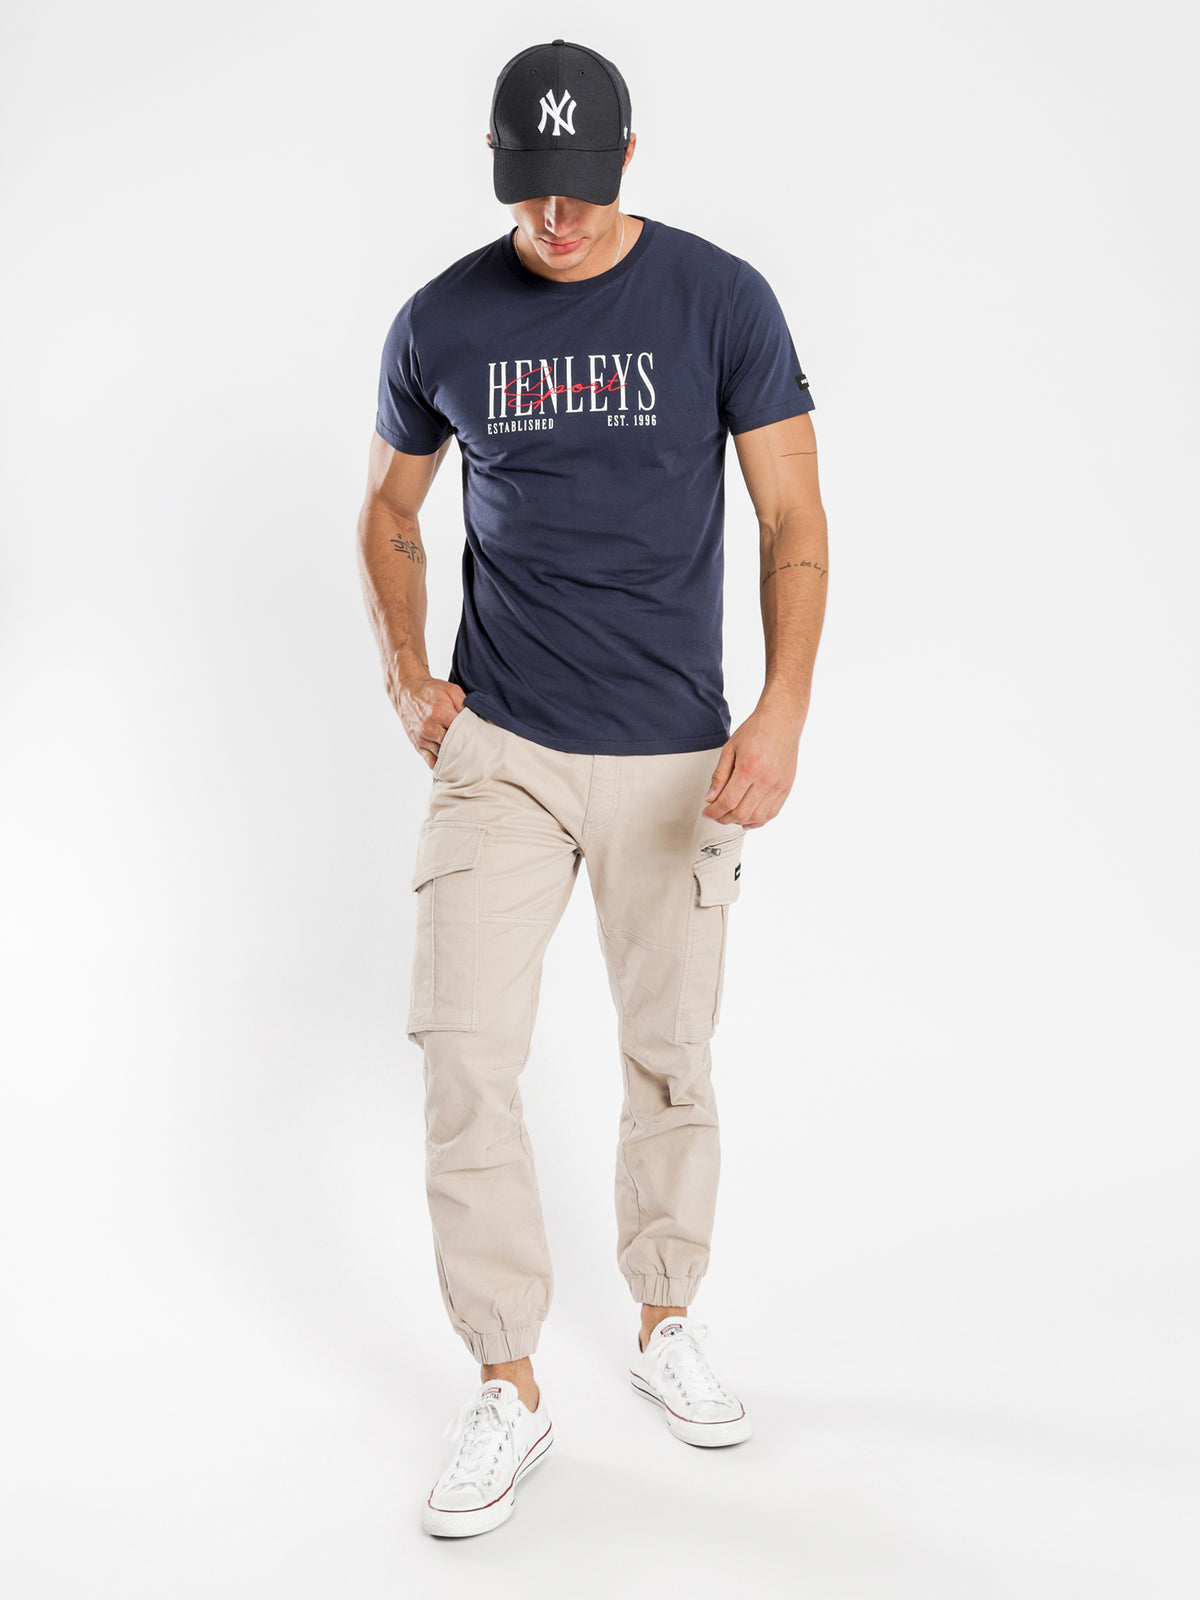 Jacob Relaxed Fit Cargo Pants in Stone